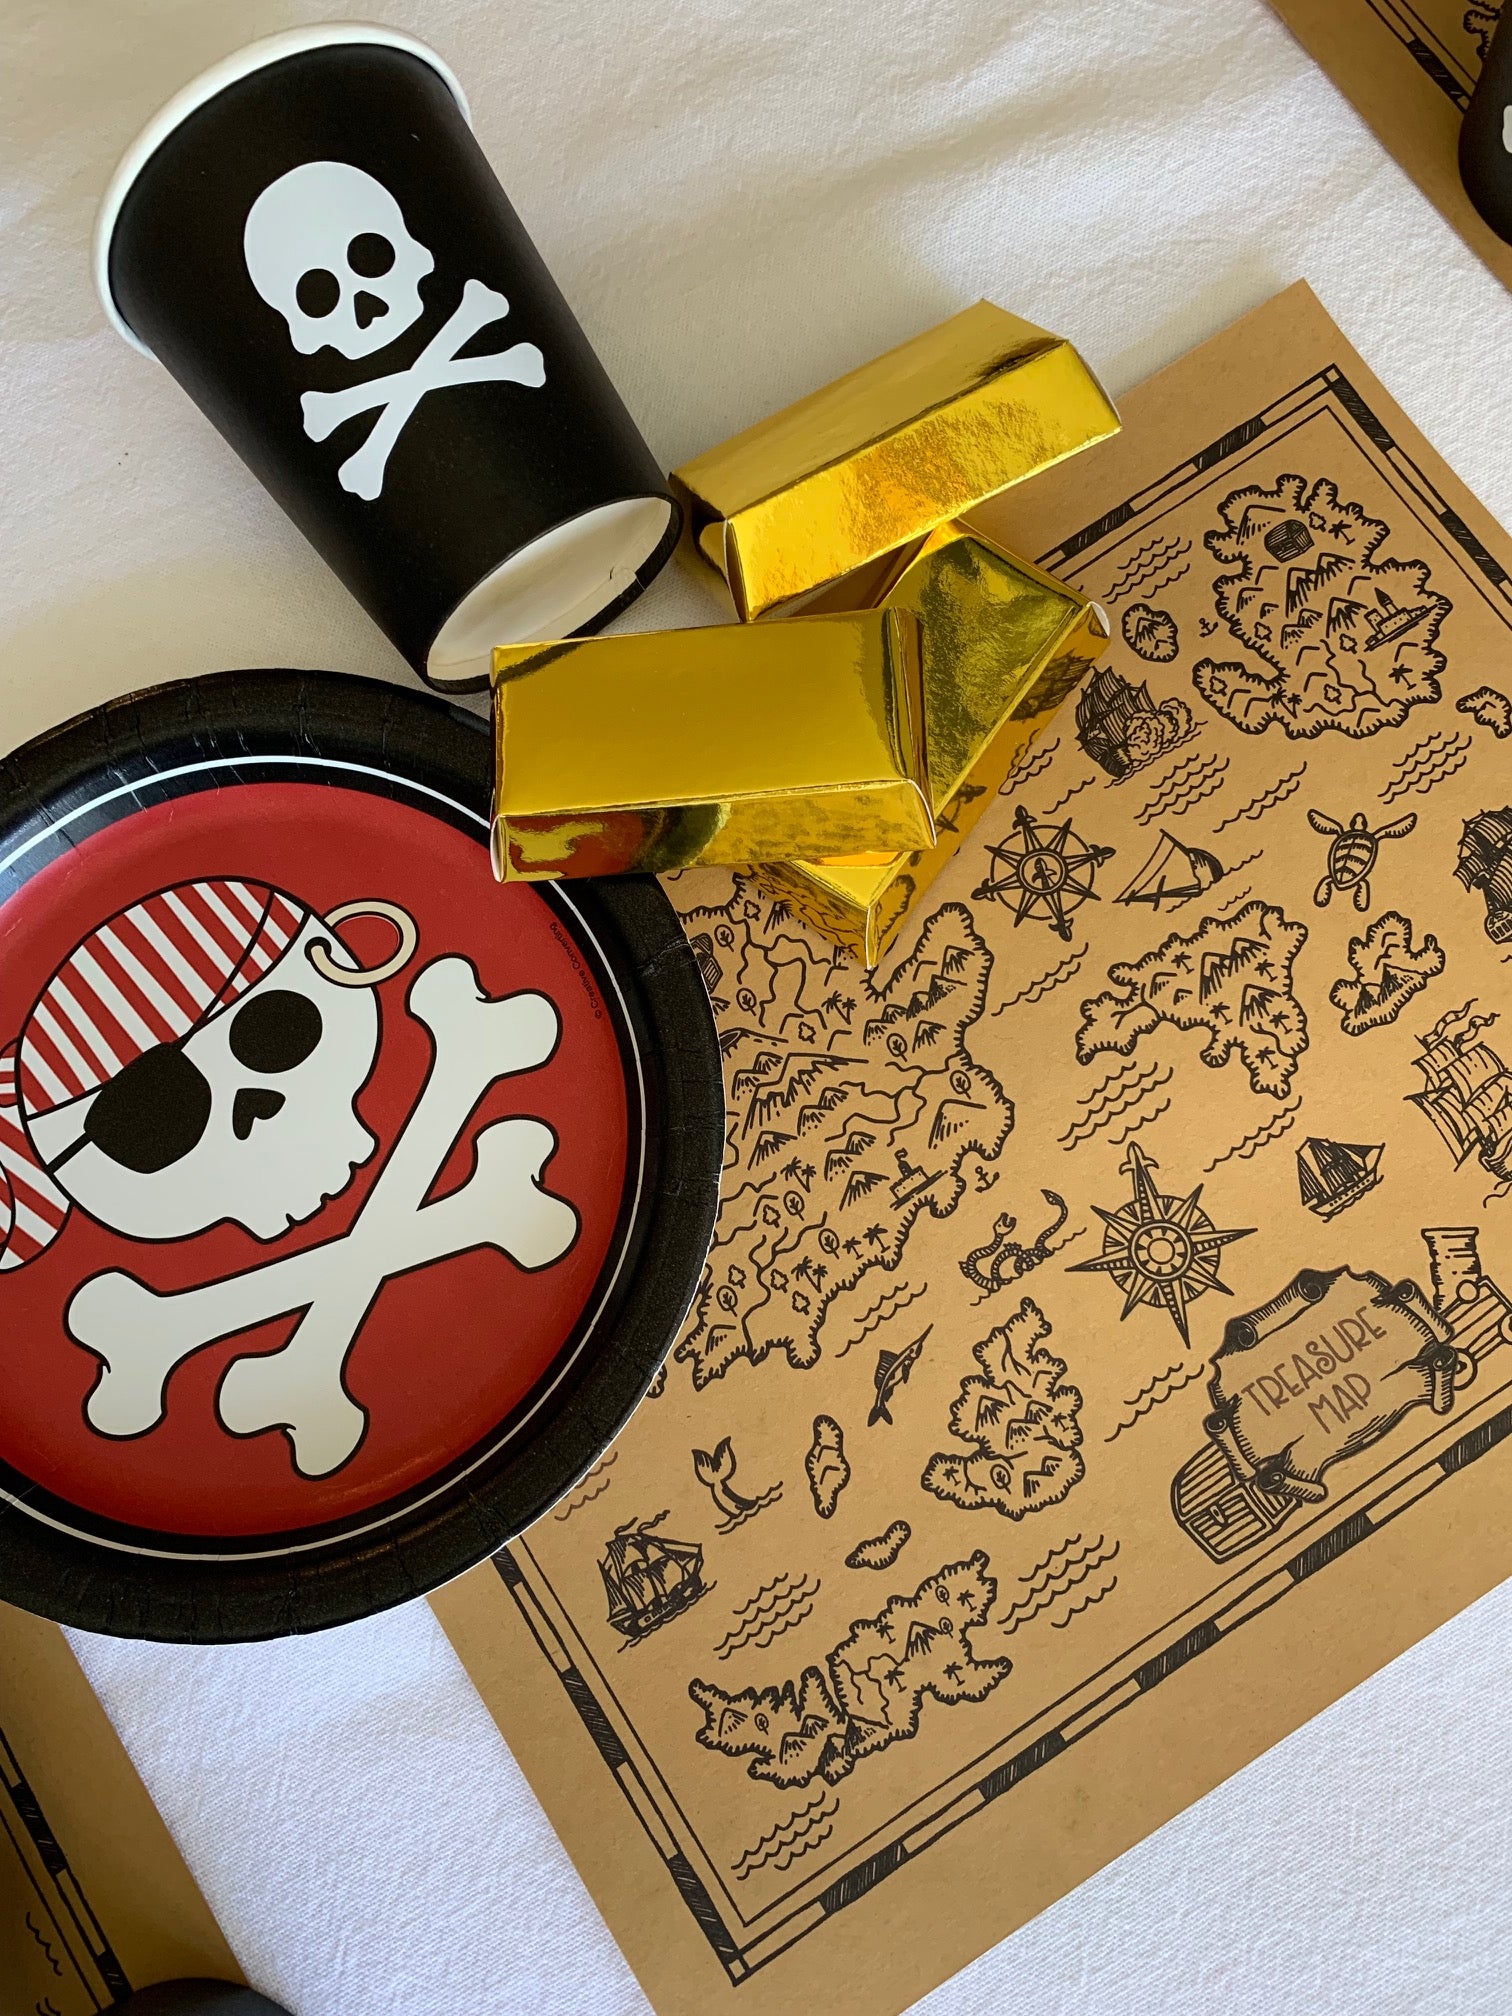 Pirate party supplies